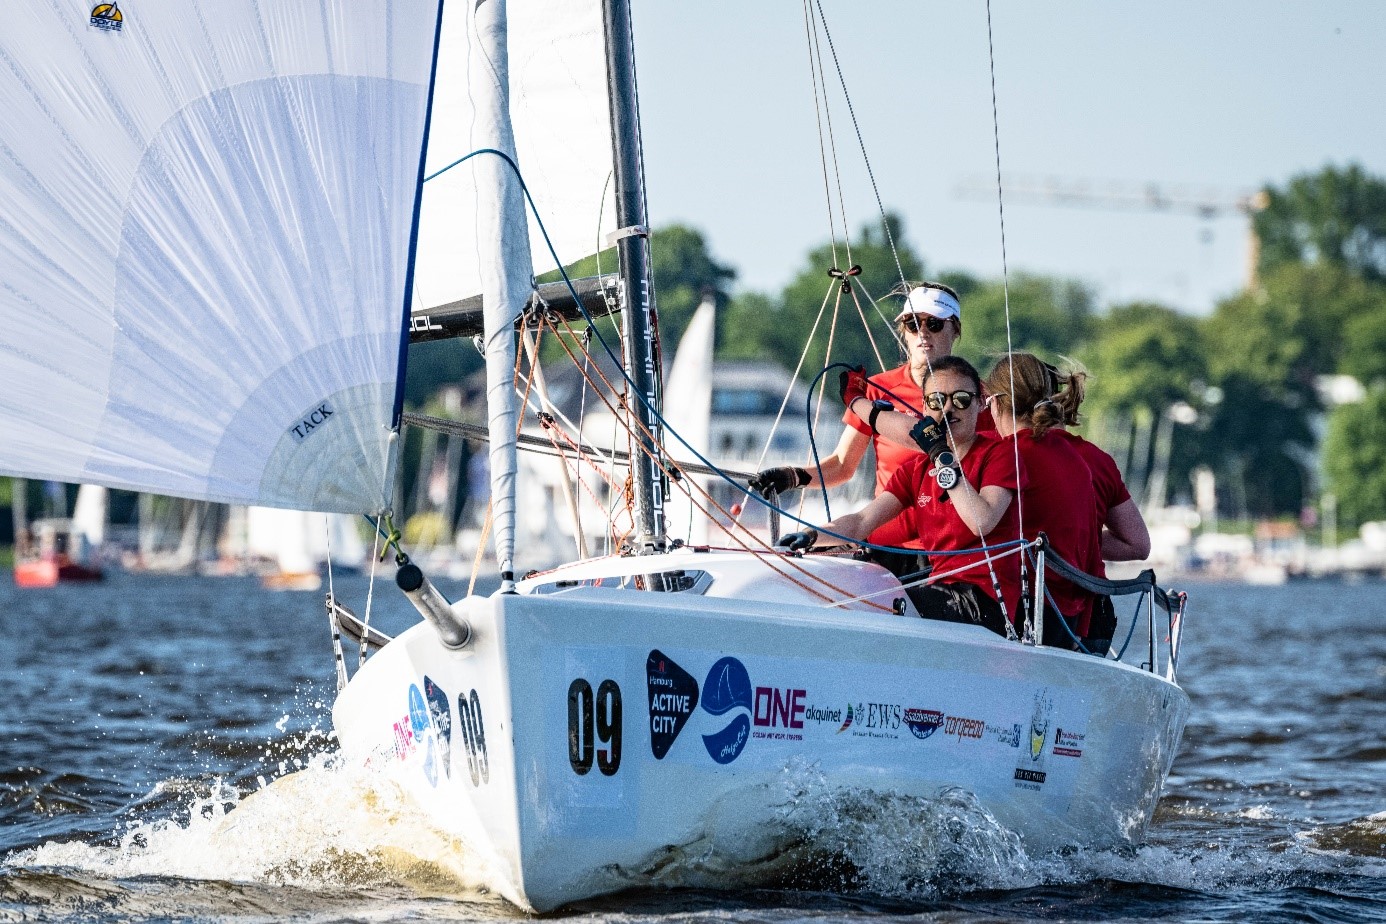 Silke Basedow wins the Helga Cup for the fourth time